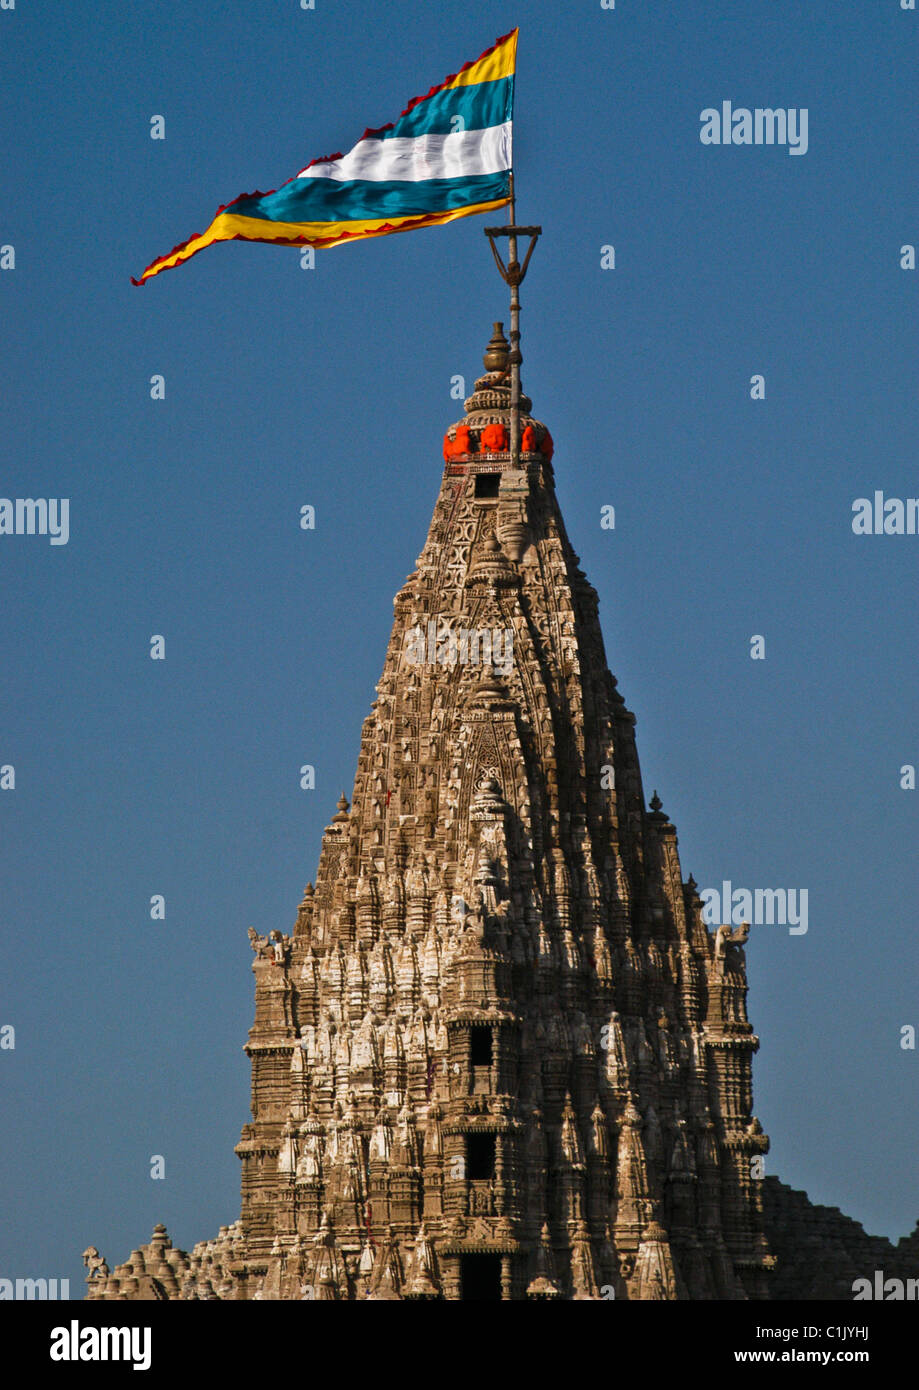 Exquisitely carved 43 meters high tower of ancient magnificent seven storied Dwarkadhish temple in Dwarka, west coast of India. Stock Photo